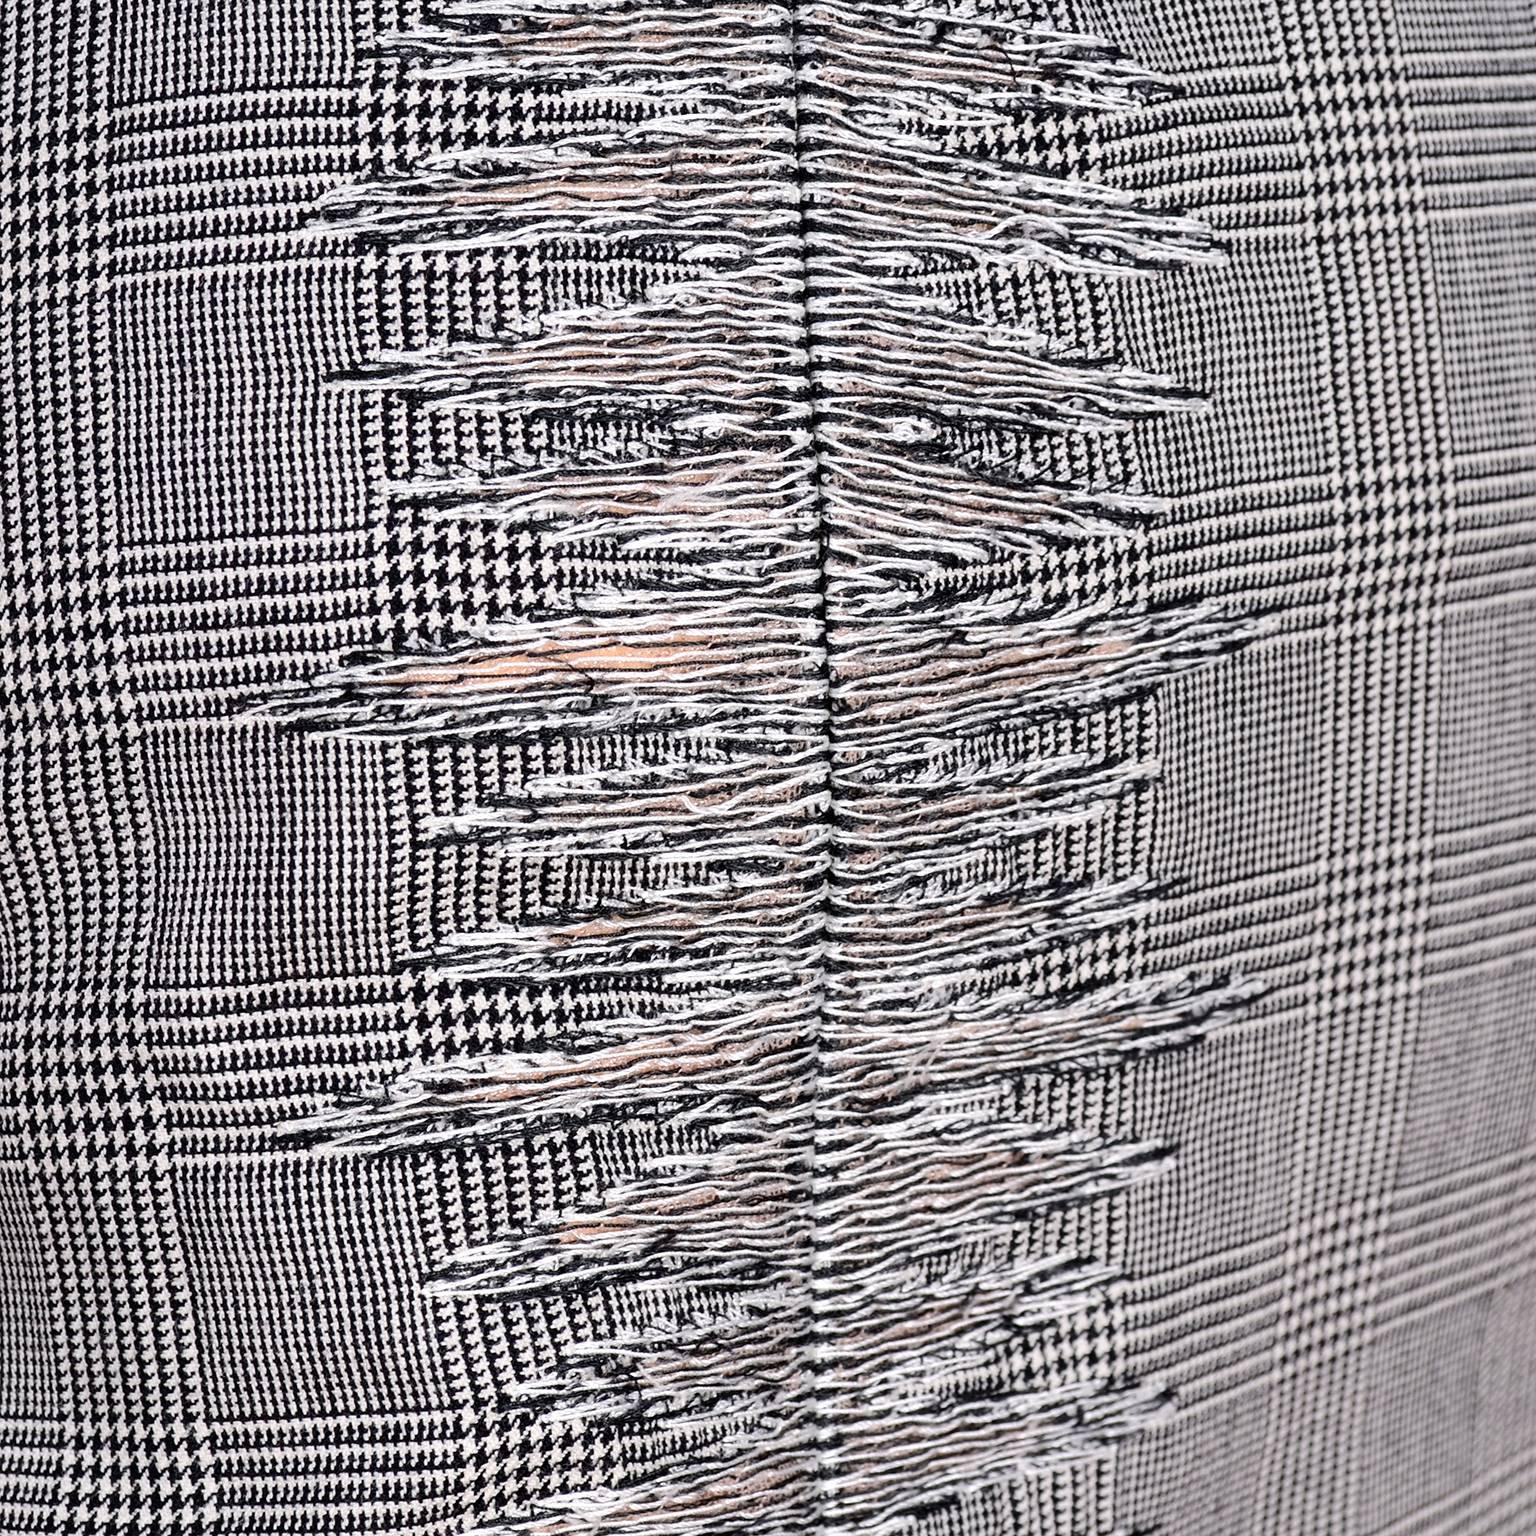 Women's Versace Strapless Runway Dress in Houndstooth Plaid, Spring 1998